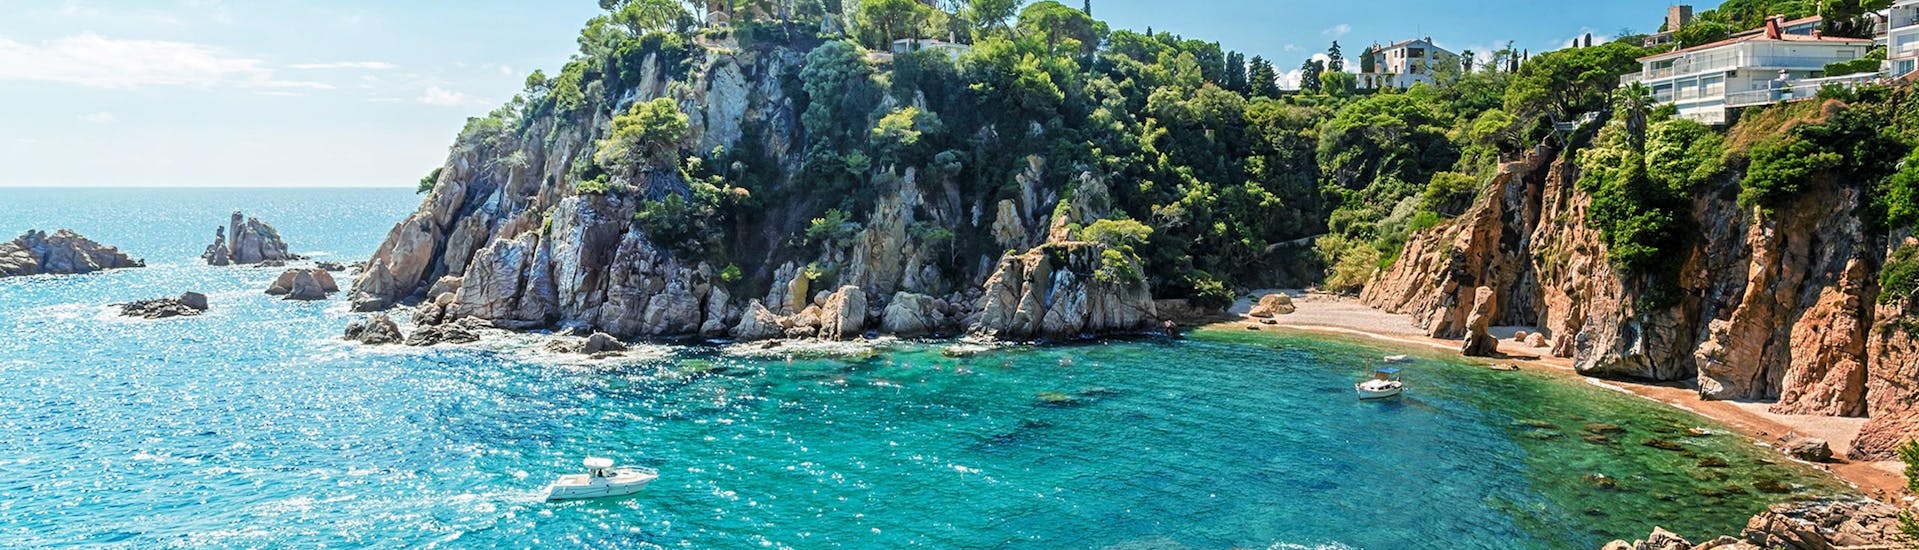 Picture of a paradisiacal cove on the Costa Brava in summer.